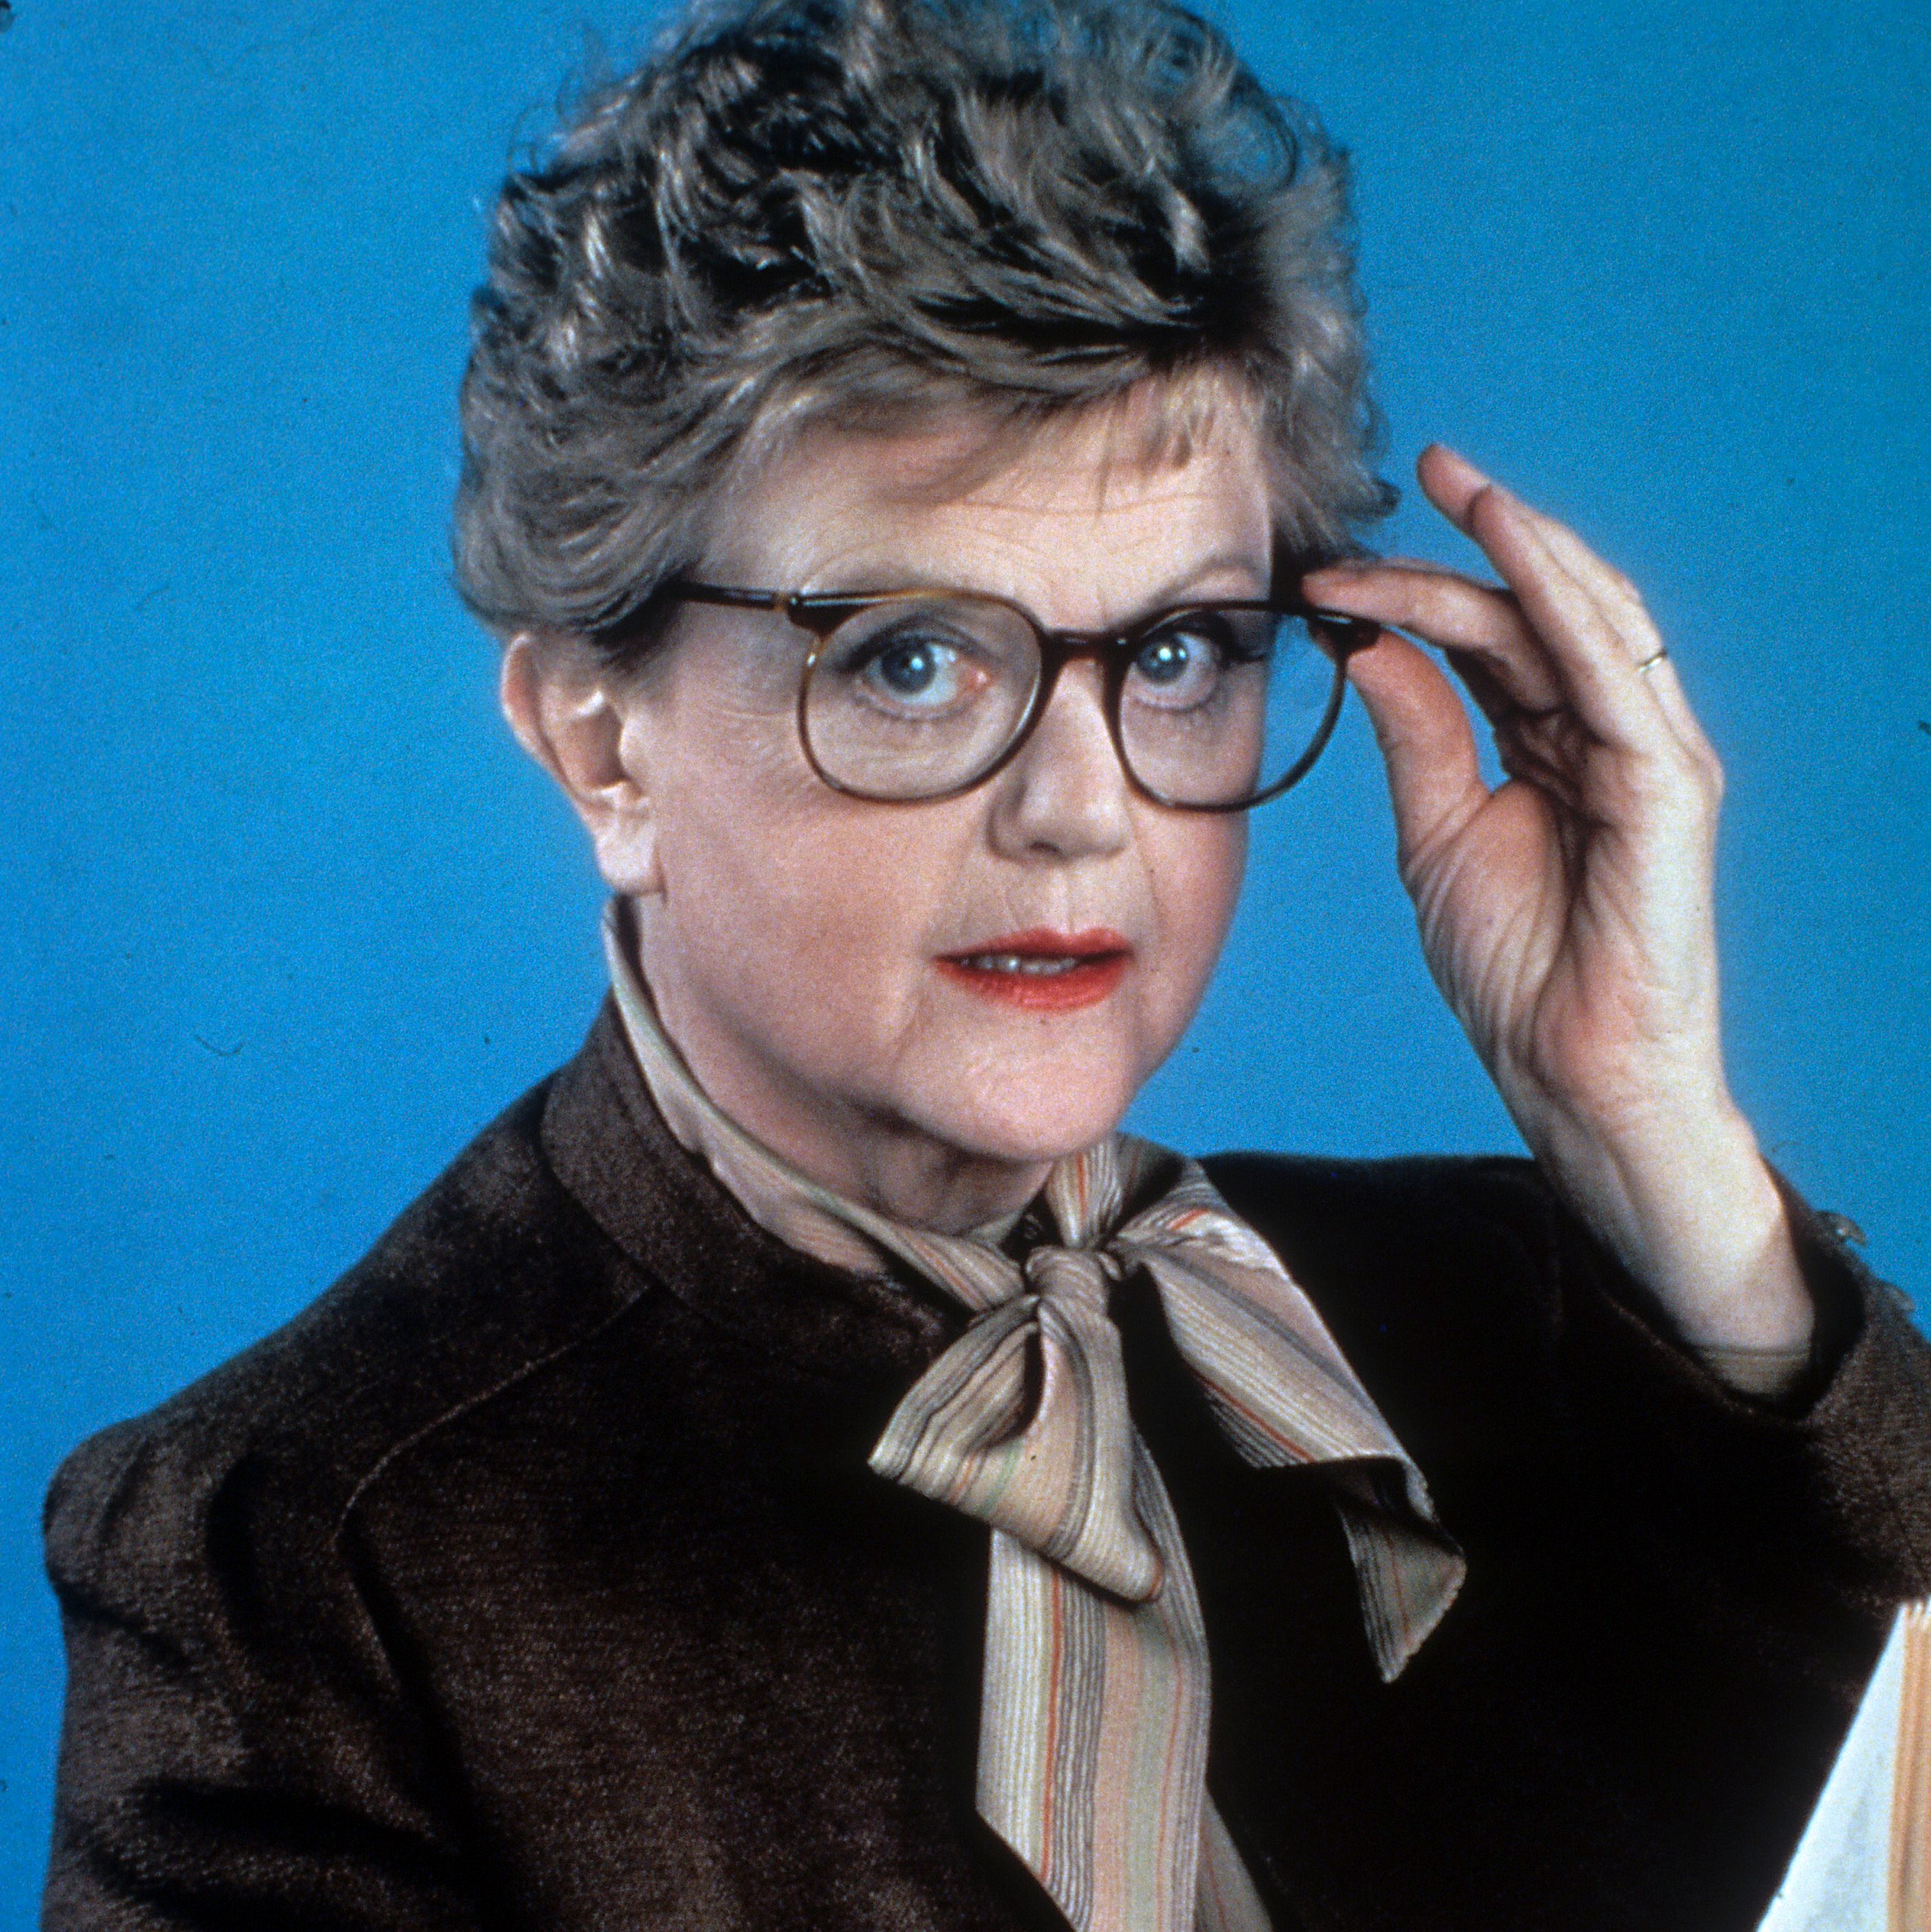 Angela Lansbury in a publicity portrait for 'Murder, She Wrote, 1984